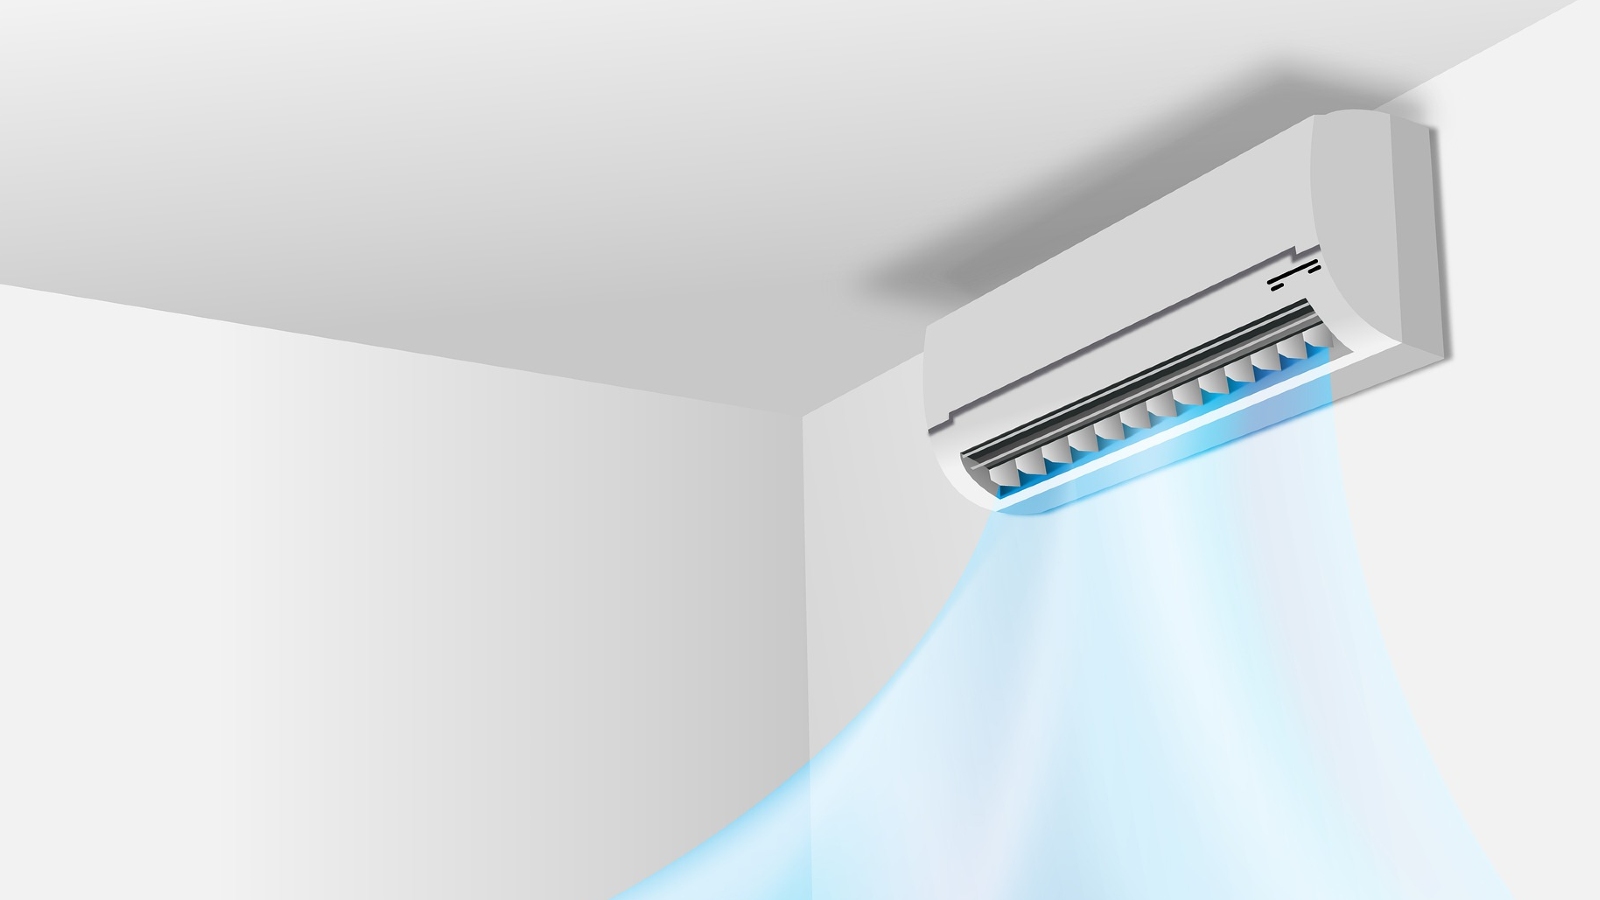 Smart AC buying guide: Your ultimate checklist to get the best inverter AC this summer